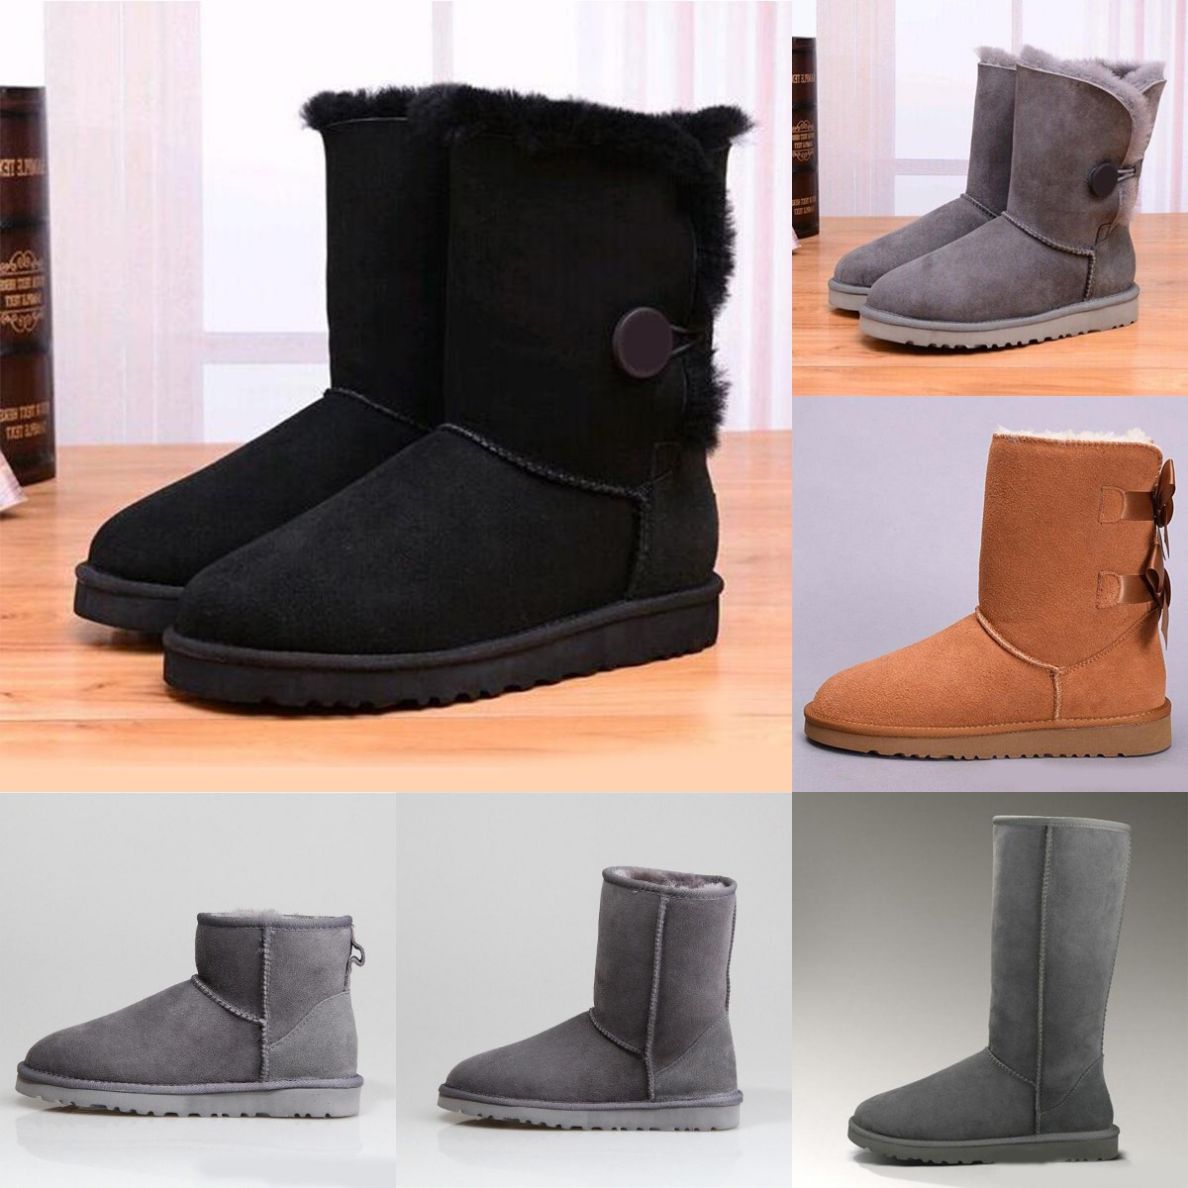 

Hotting Sale Women Winter Snow Boots Fashion Australia Classic Short bootss Ankle Knee Bow girl MINI Bailey Boot SIZE US5 -US10, Not sold separately